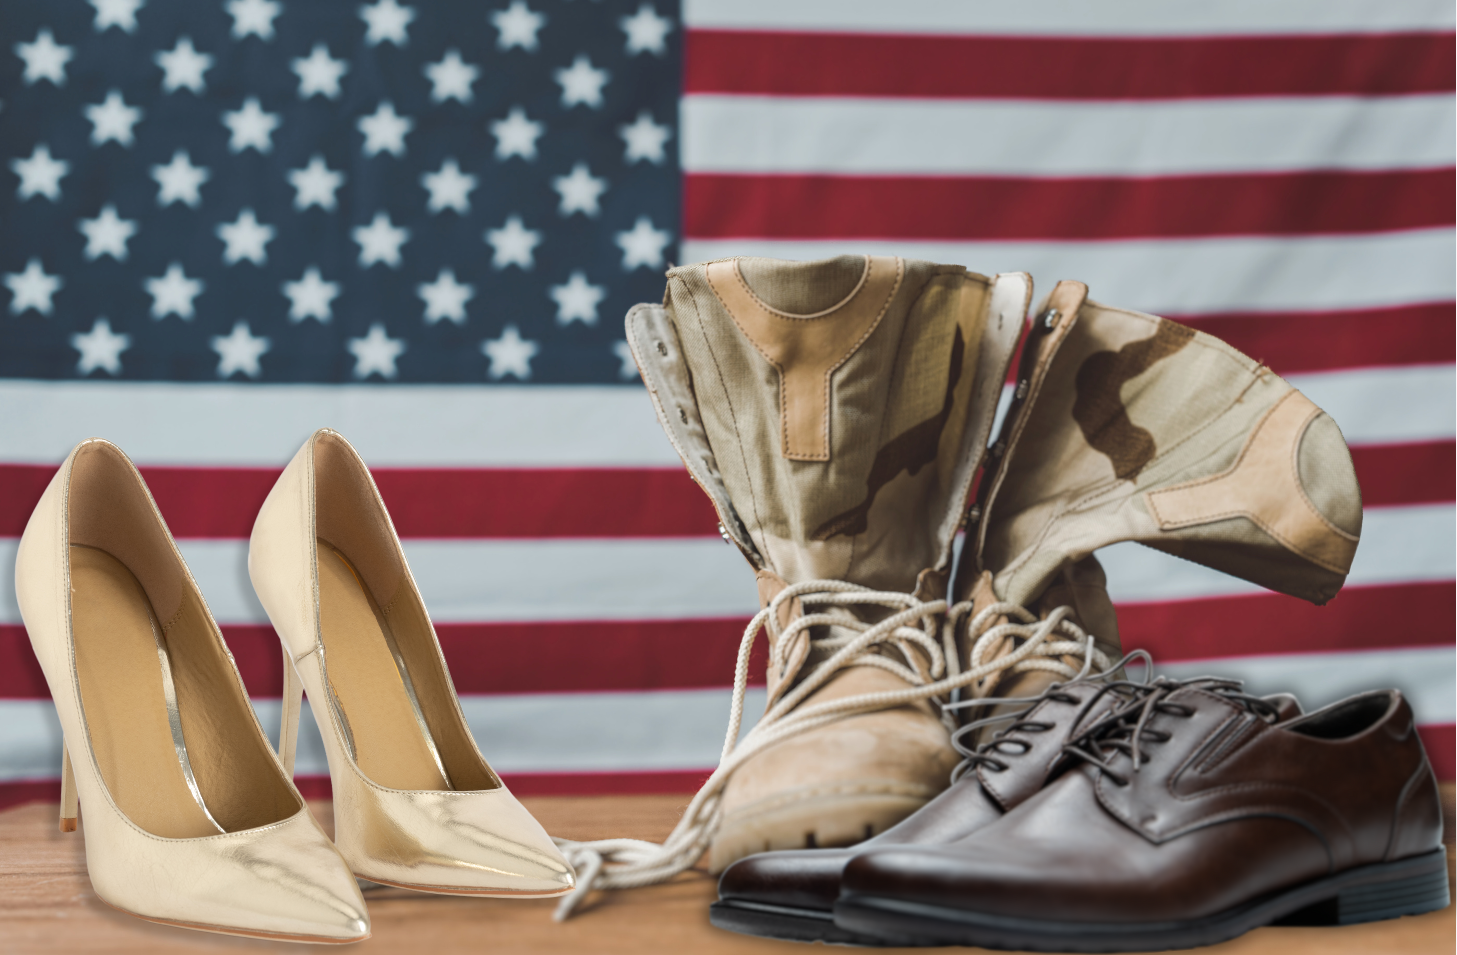 Military shoes, dress shoes, and high heels